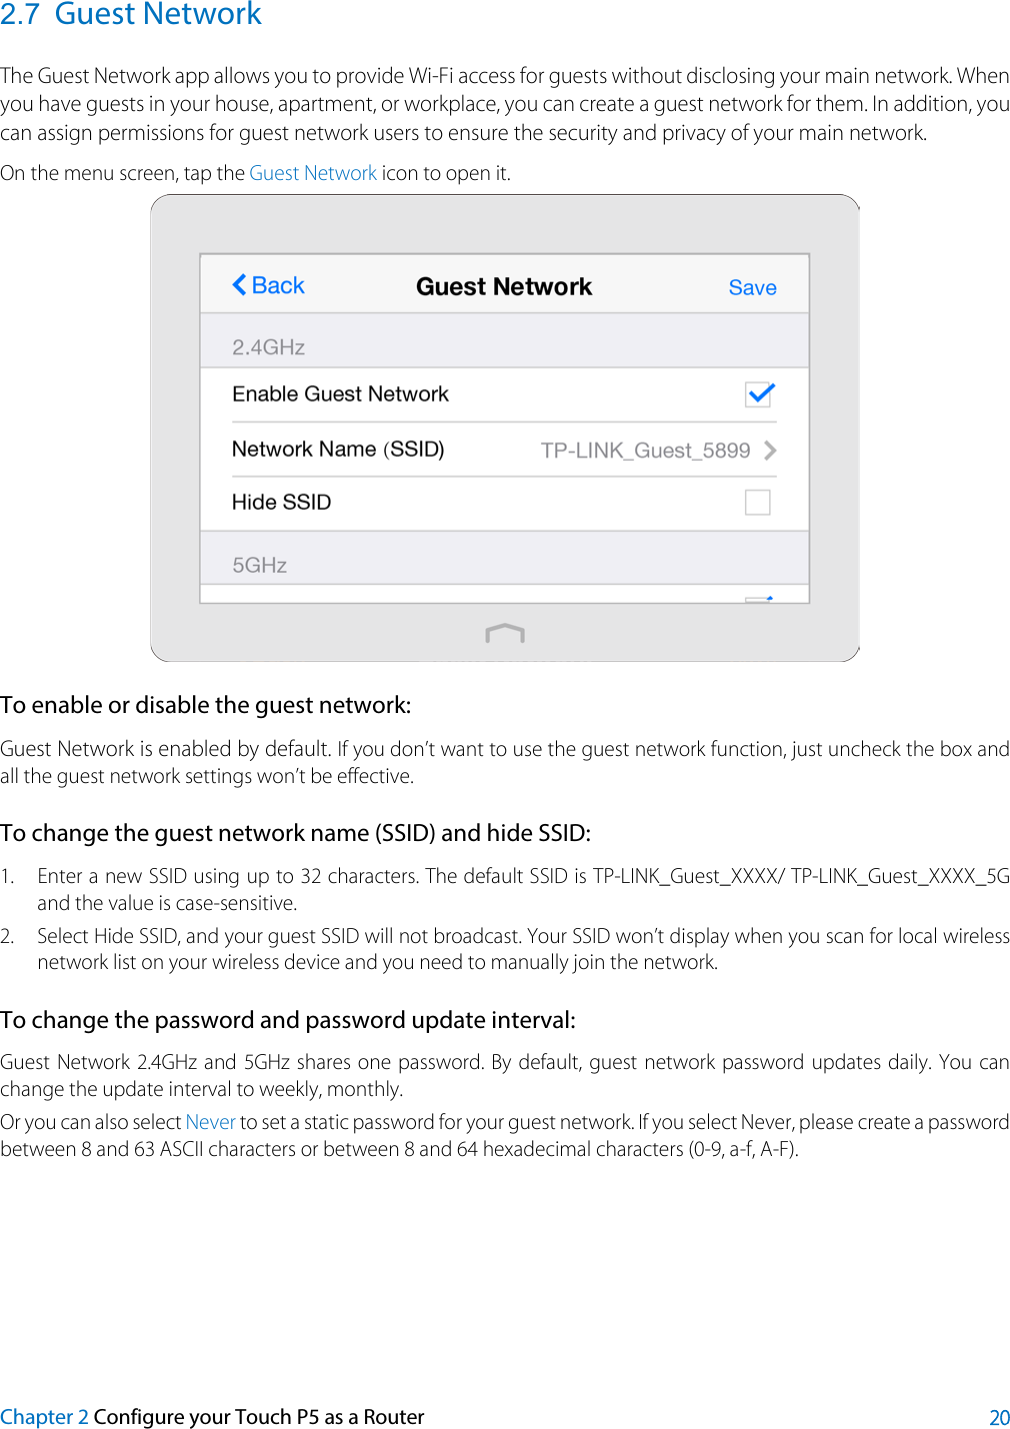  2.7 Guest Network The Guest Network app allows you to provide Wi-Fi access for guests without disclosing your main network. When you have guests in your house, apartment, or workplace, you can create a guest network for them. In addition, you can assign permissions for guest network users to ensure the security and privacy of your main network.   On the menu screen, tap the Guest Network icon to open it.  To enable or disable the guest network: Guest Network is enabled by default. If you don’t want to use the guest network function, just uncheck the box and all the guest network settings won’t be effective. To change the guest network name (SSID) and hide SSID: 1. Enter a new SSID using up to 32 characters. The default SSID is TP-LINK_Guest_XXXX/ TP-LINK_Guest_XXXX_5G and the value is case-sensitive. 2. Select Hide SSID, and your guest SSID will not broadcast. Your SSID won’t display when you scan for local wireless network list on your wireless device and you need to manually join the network. To change the password and password update interval: Guest Network 2.4GHz and  5GHz shares one password. By default, guest network password updates daily. You can change the update interval to weekly, monthly.   Or you can also select Never to set a static password for your guest network. If you select Never, please create a password between 8 and 63 ASCII characters or between 8 and 64 hexadecimal characters (0-9, a-f, A-F). Chapter 2 Configure your Touch P5 as a Router 20 